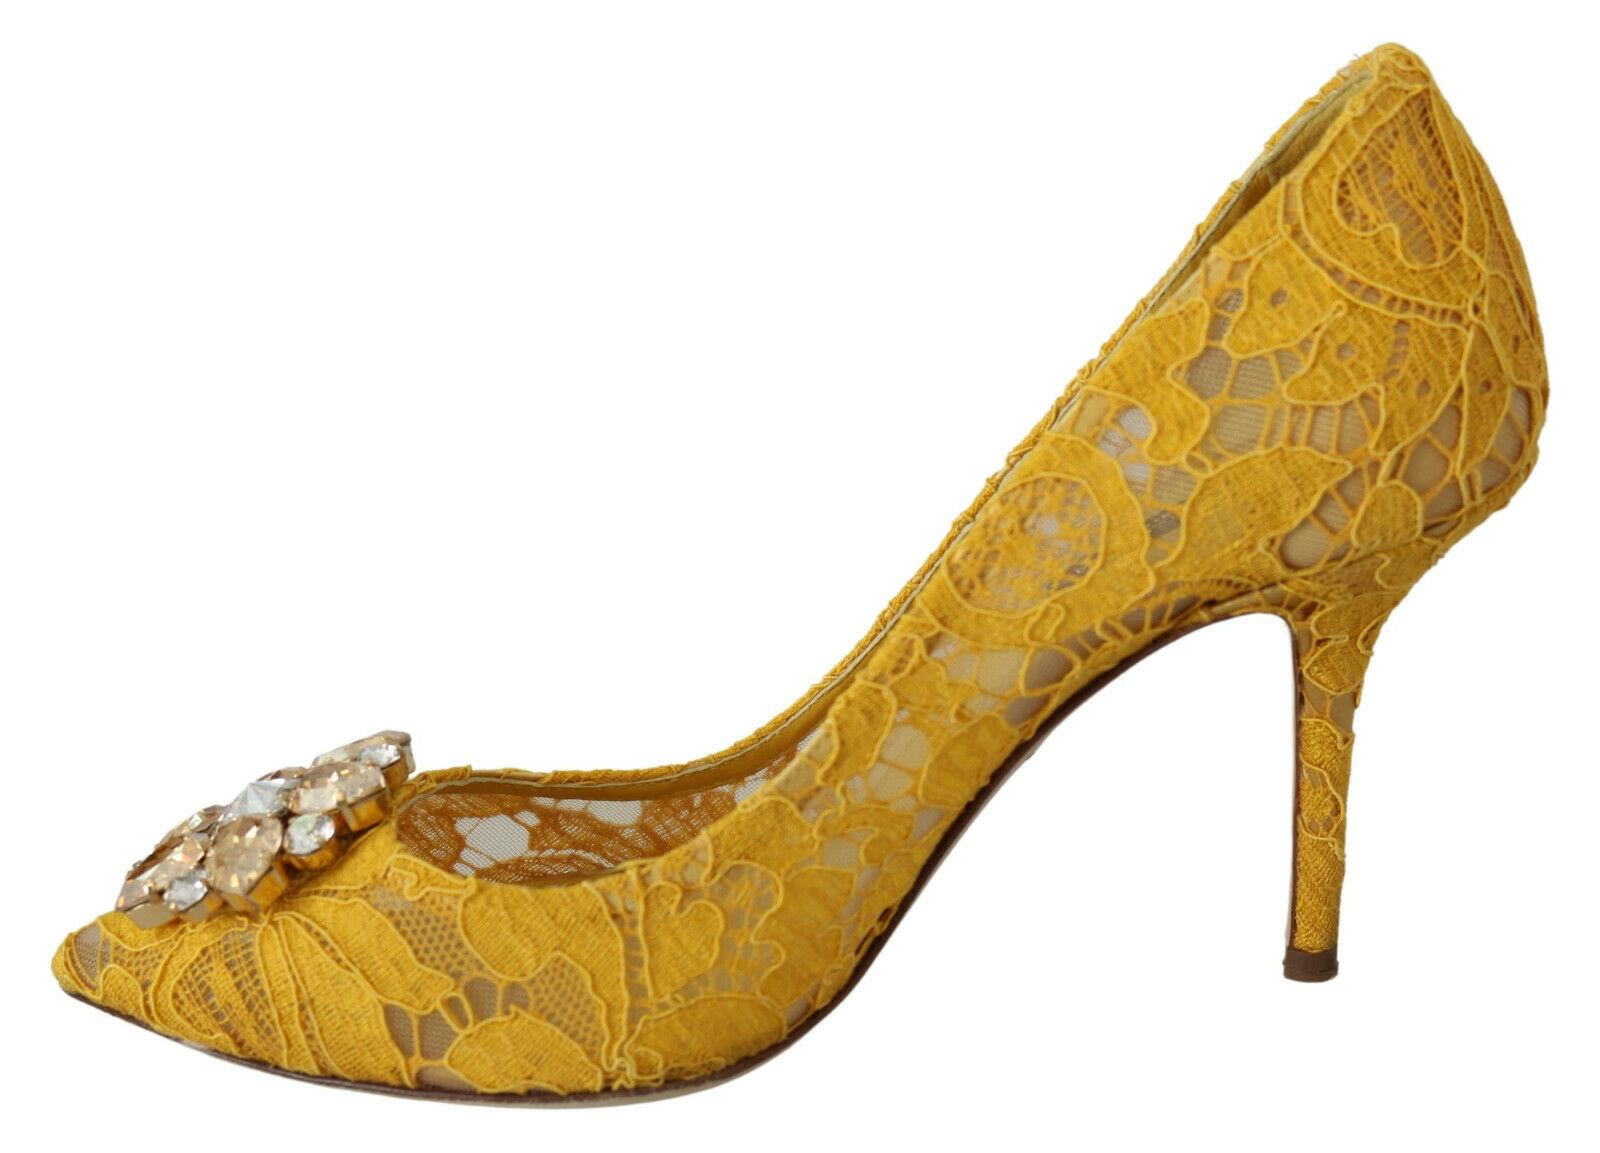 Dolce & Gabbana Yellow Lace Pointy Pumps Heels Shoes Floral Jewel Leather 2